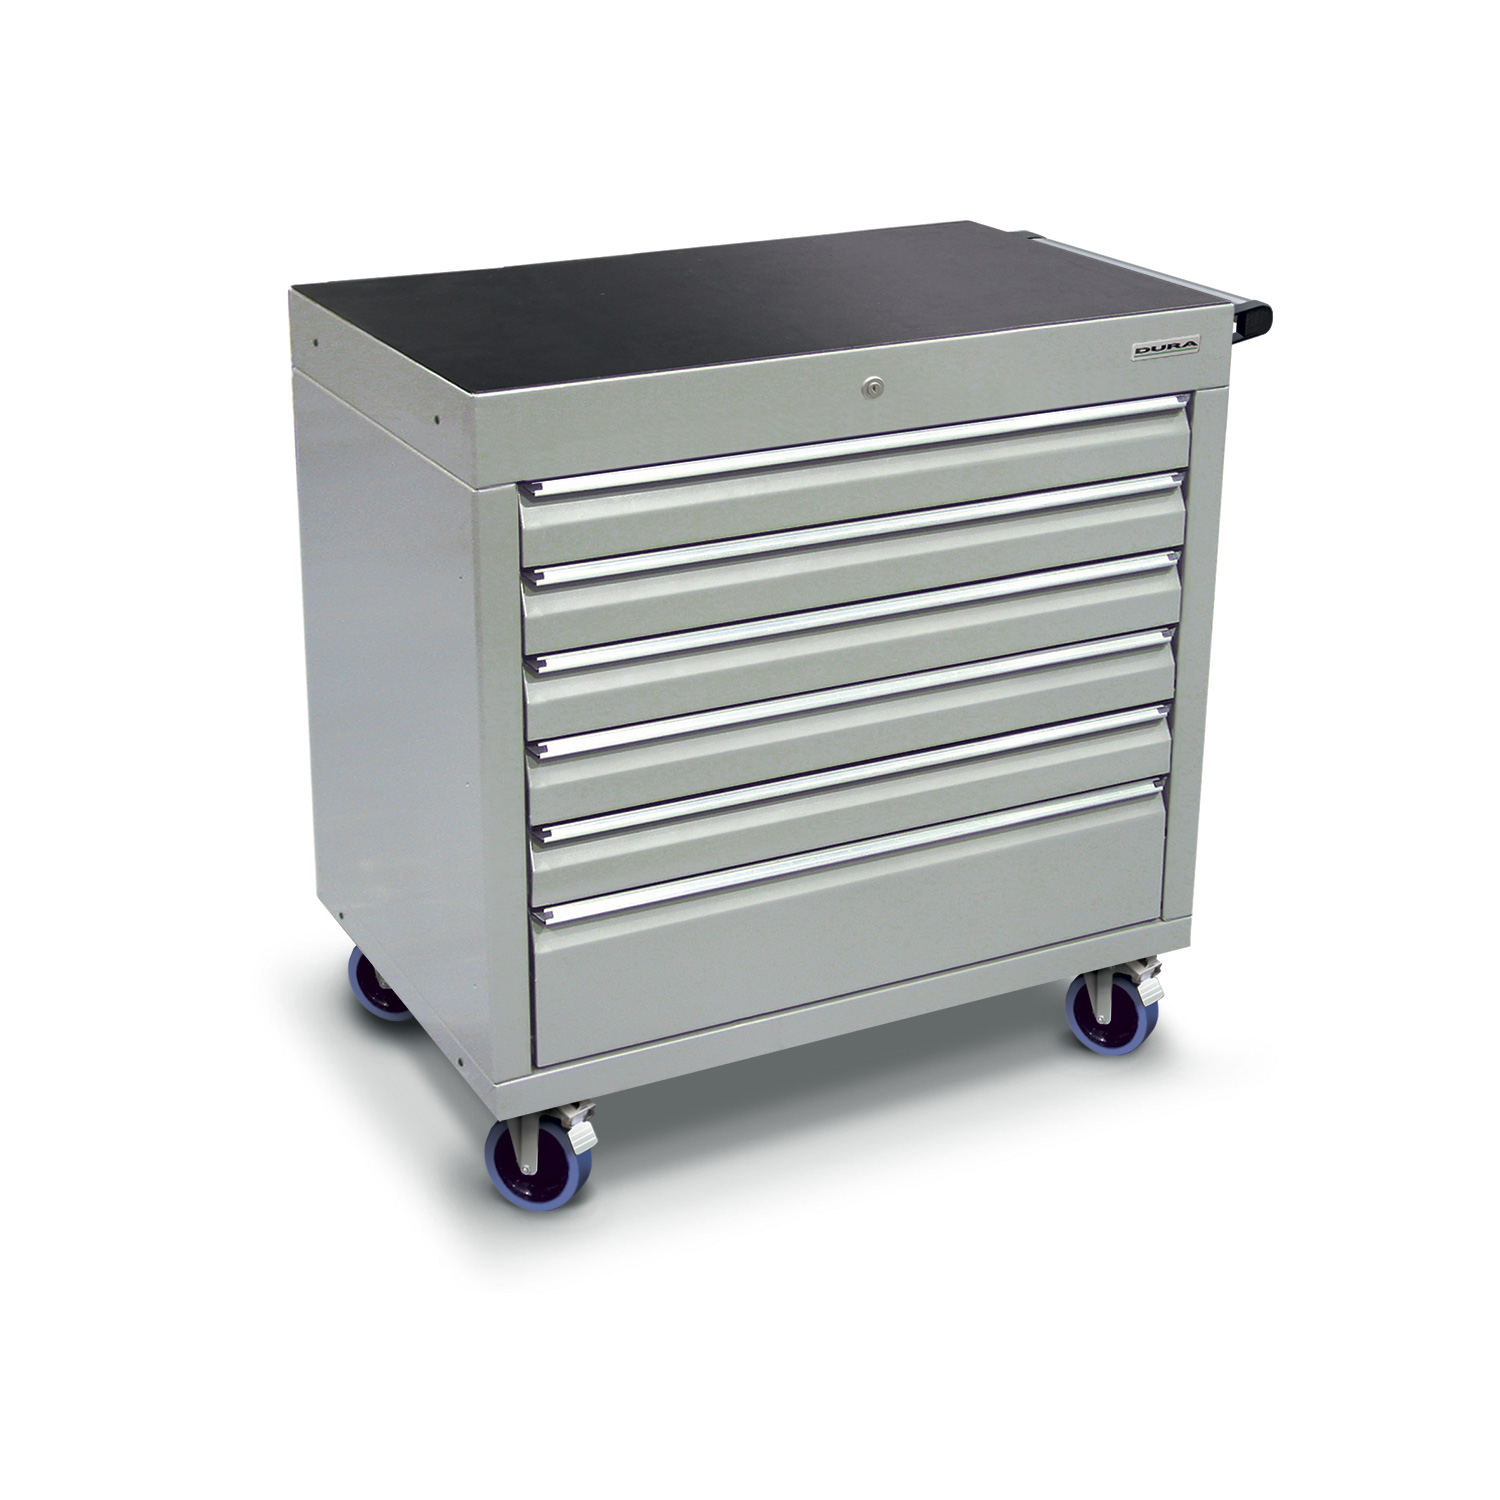  900 series cabinet with 6 drawers (5 medium, 1 large) and castors